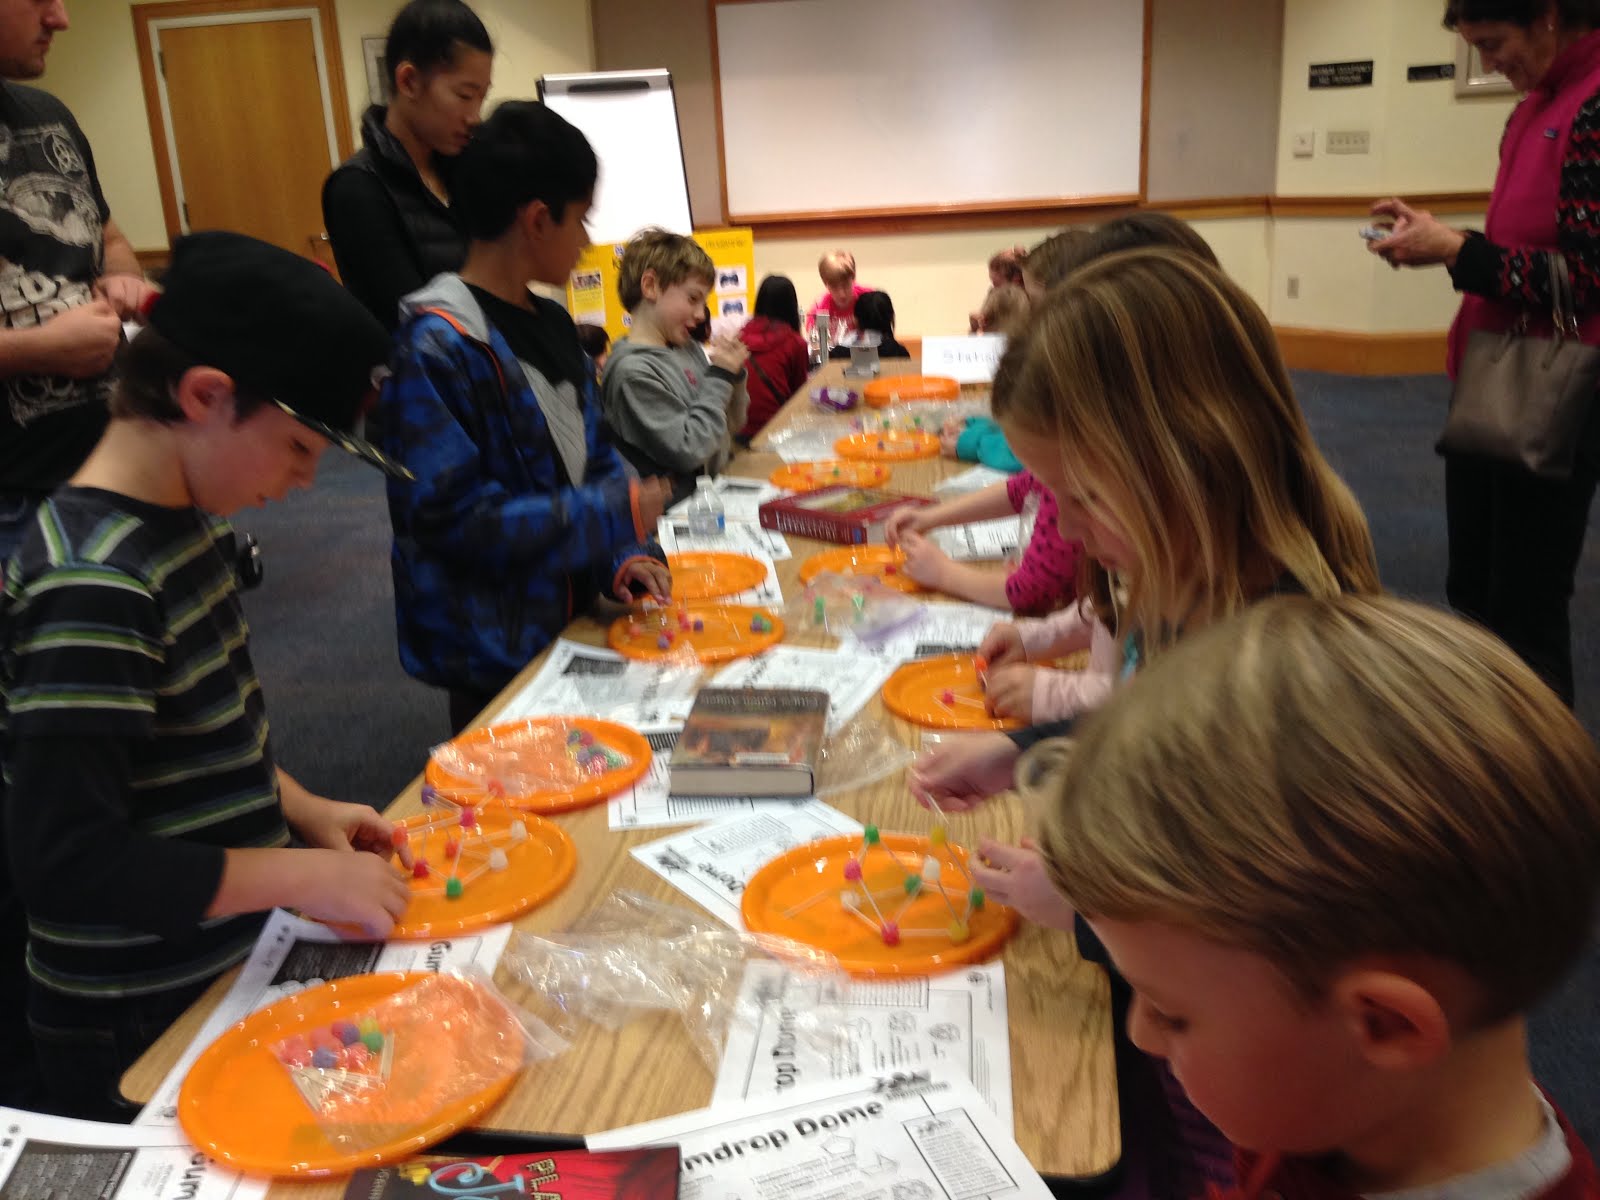 Fun with Robots, Math and Science Day at the Library